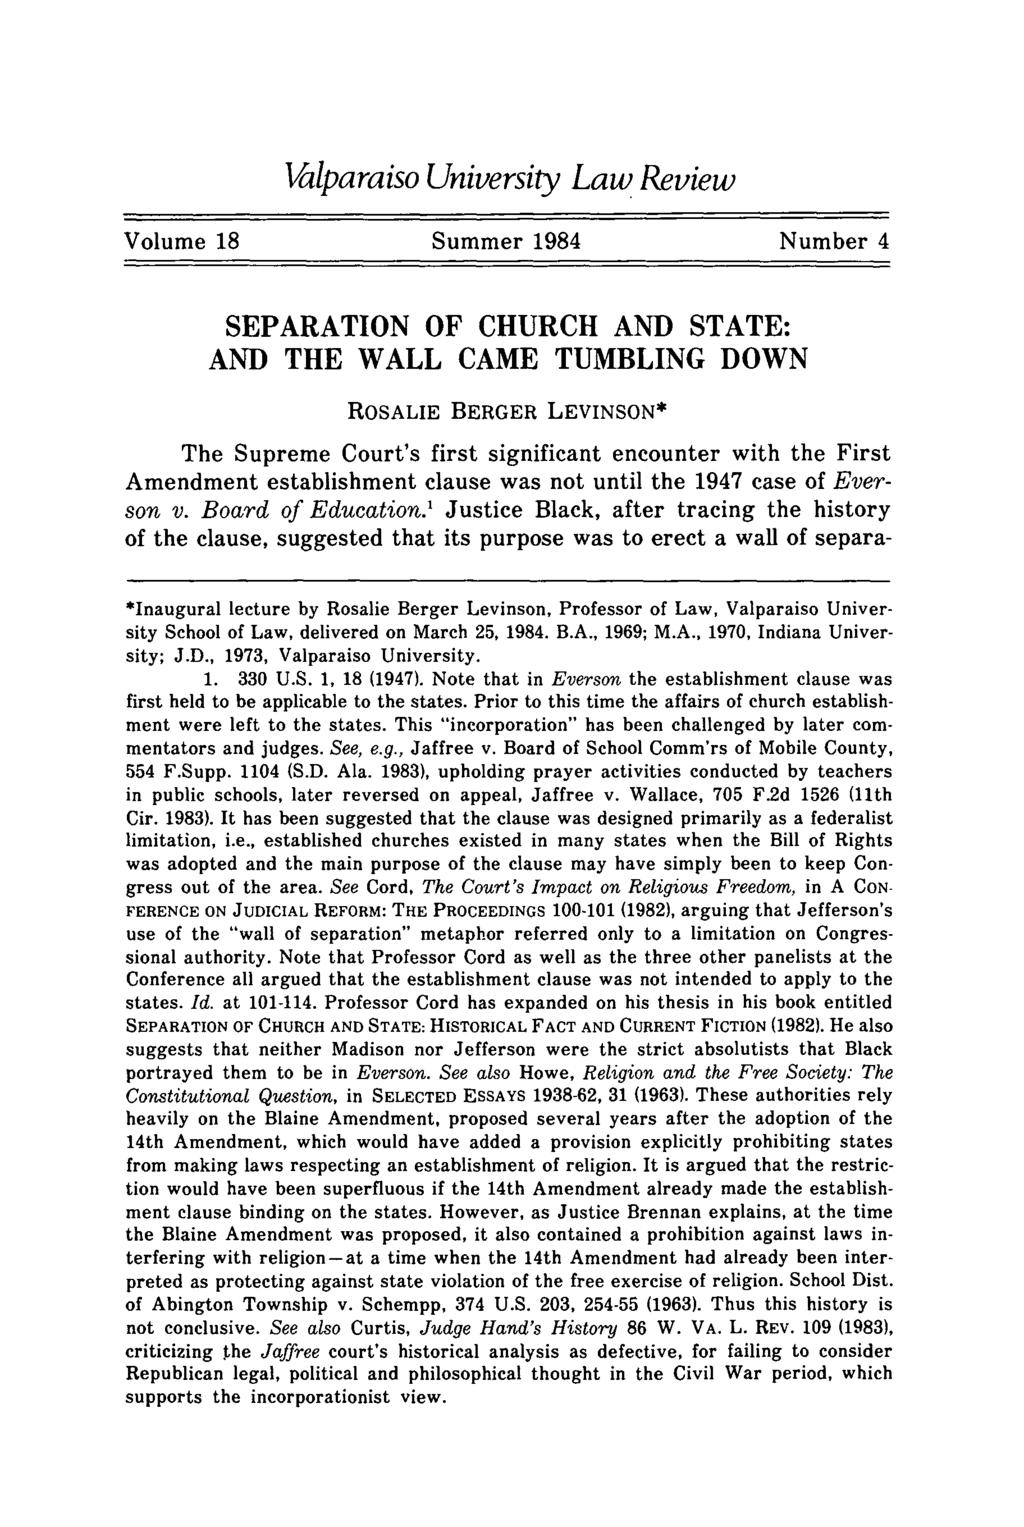 Levinson: Separation of Church and State: And the Wall Came Tumbling Down Valparaiso University Law Review Volume 18 Summer 1984 Number 4 SEPARATION OF CHURCH AND STATE: AND THE WALL CAME TUMBLING